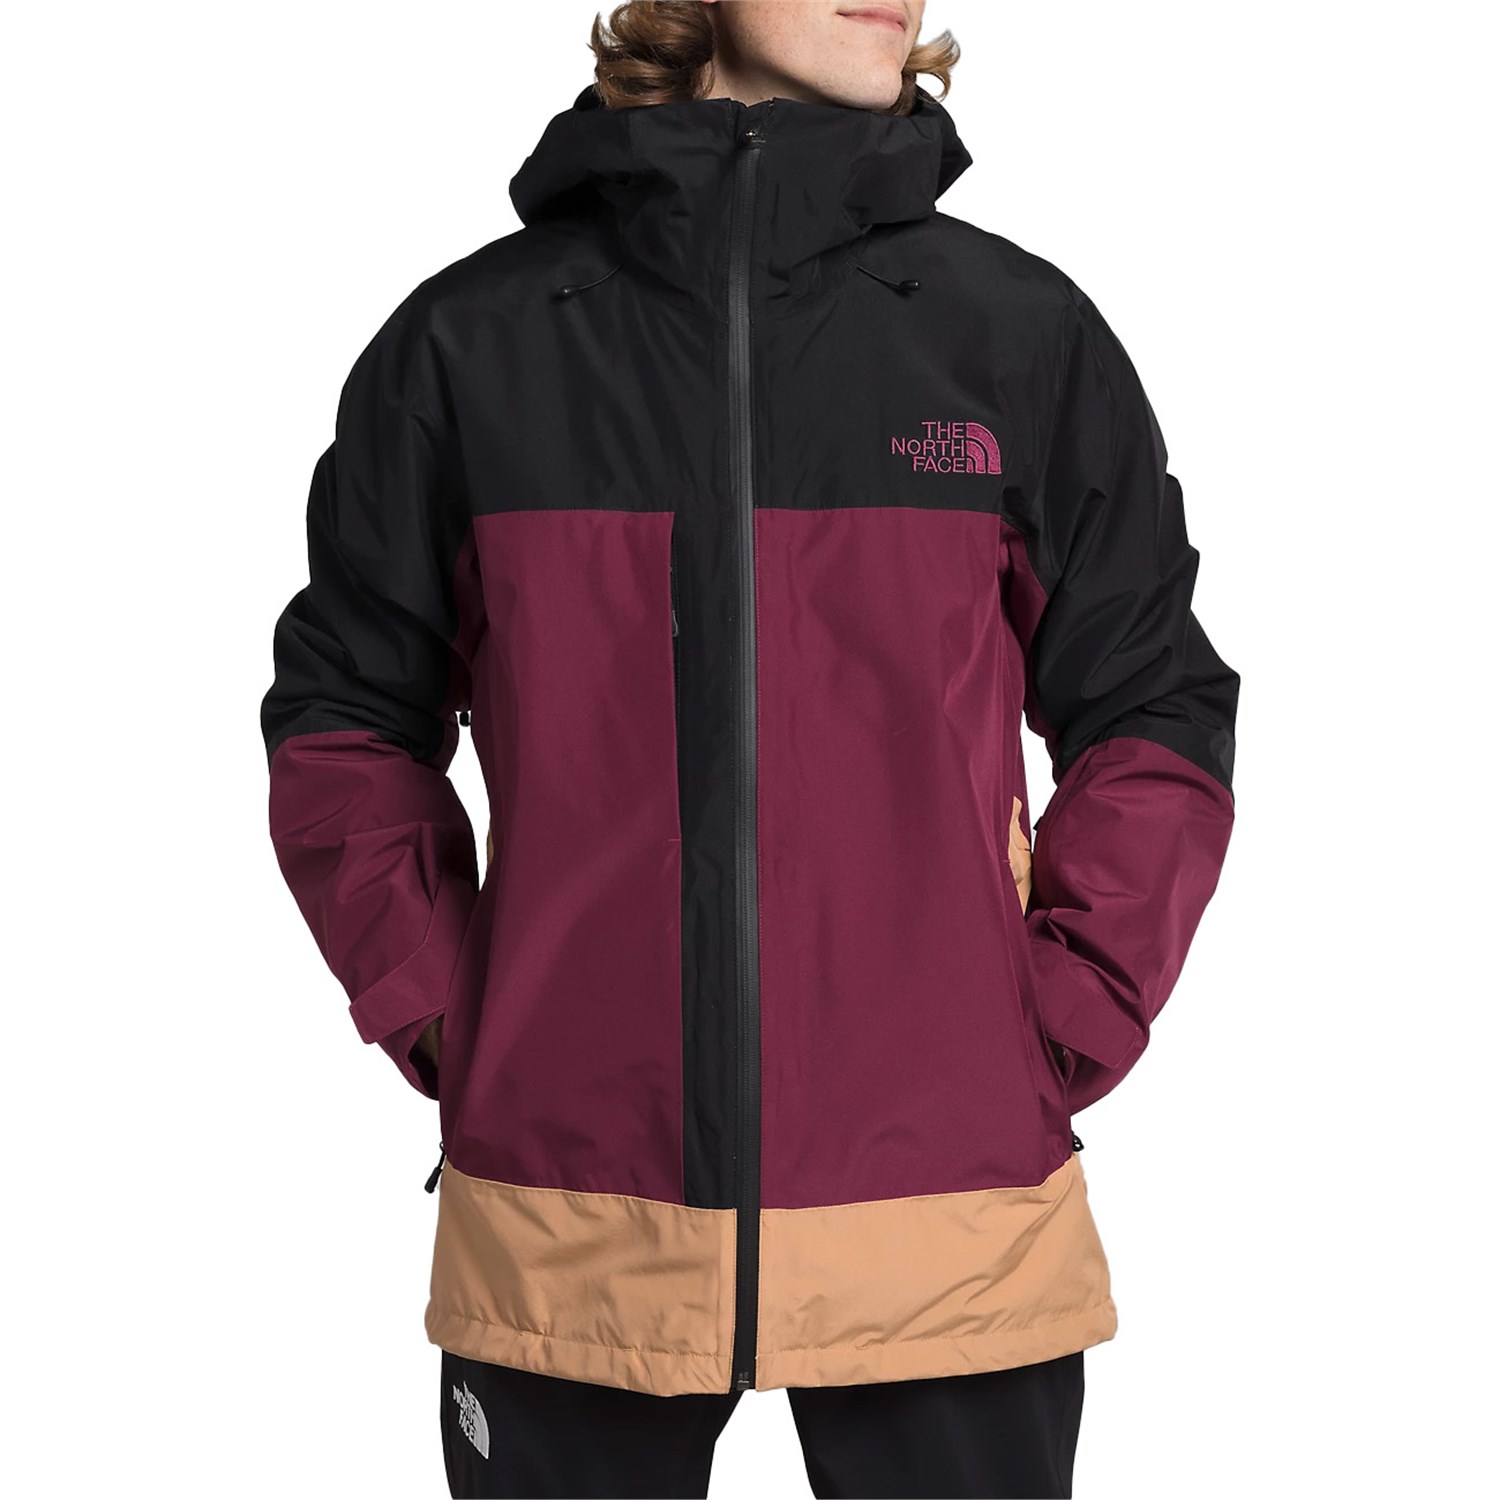 Куртка The North Face ThermoBall Eco Snow Triclimate, цвет Boysenberry/TNF Black куртка thermoball eco snow triclimate мужская the north face цвет cave blue